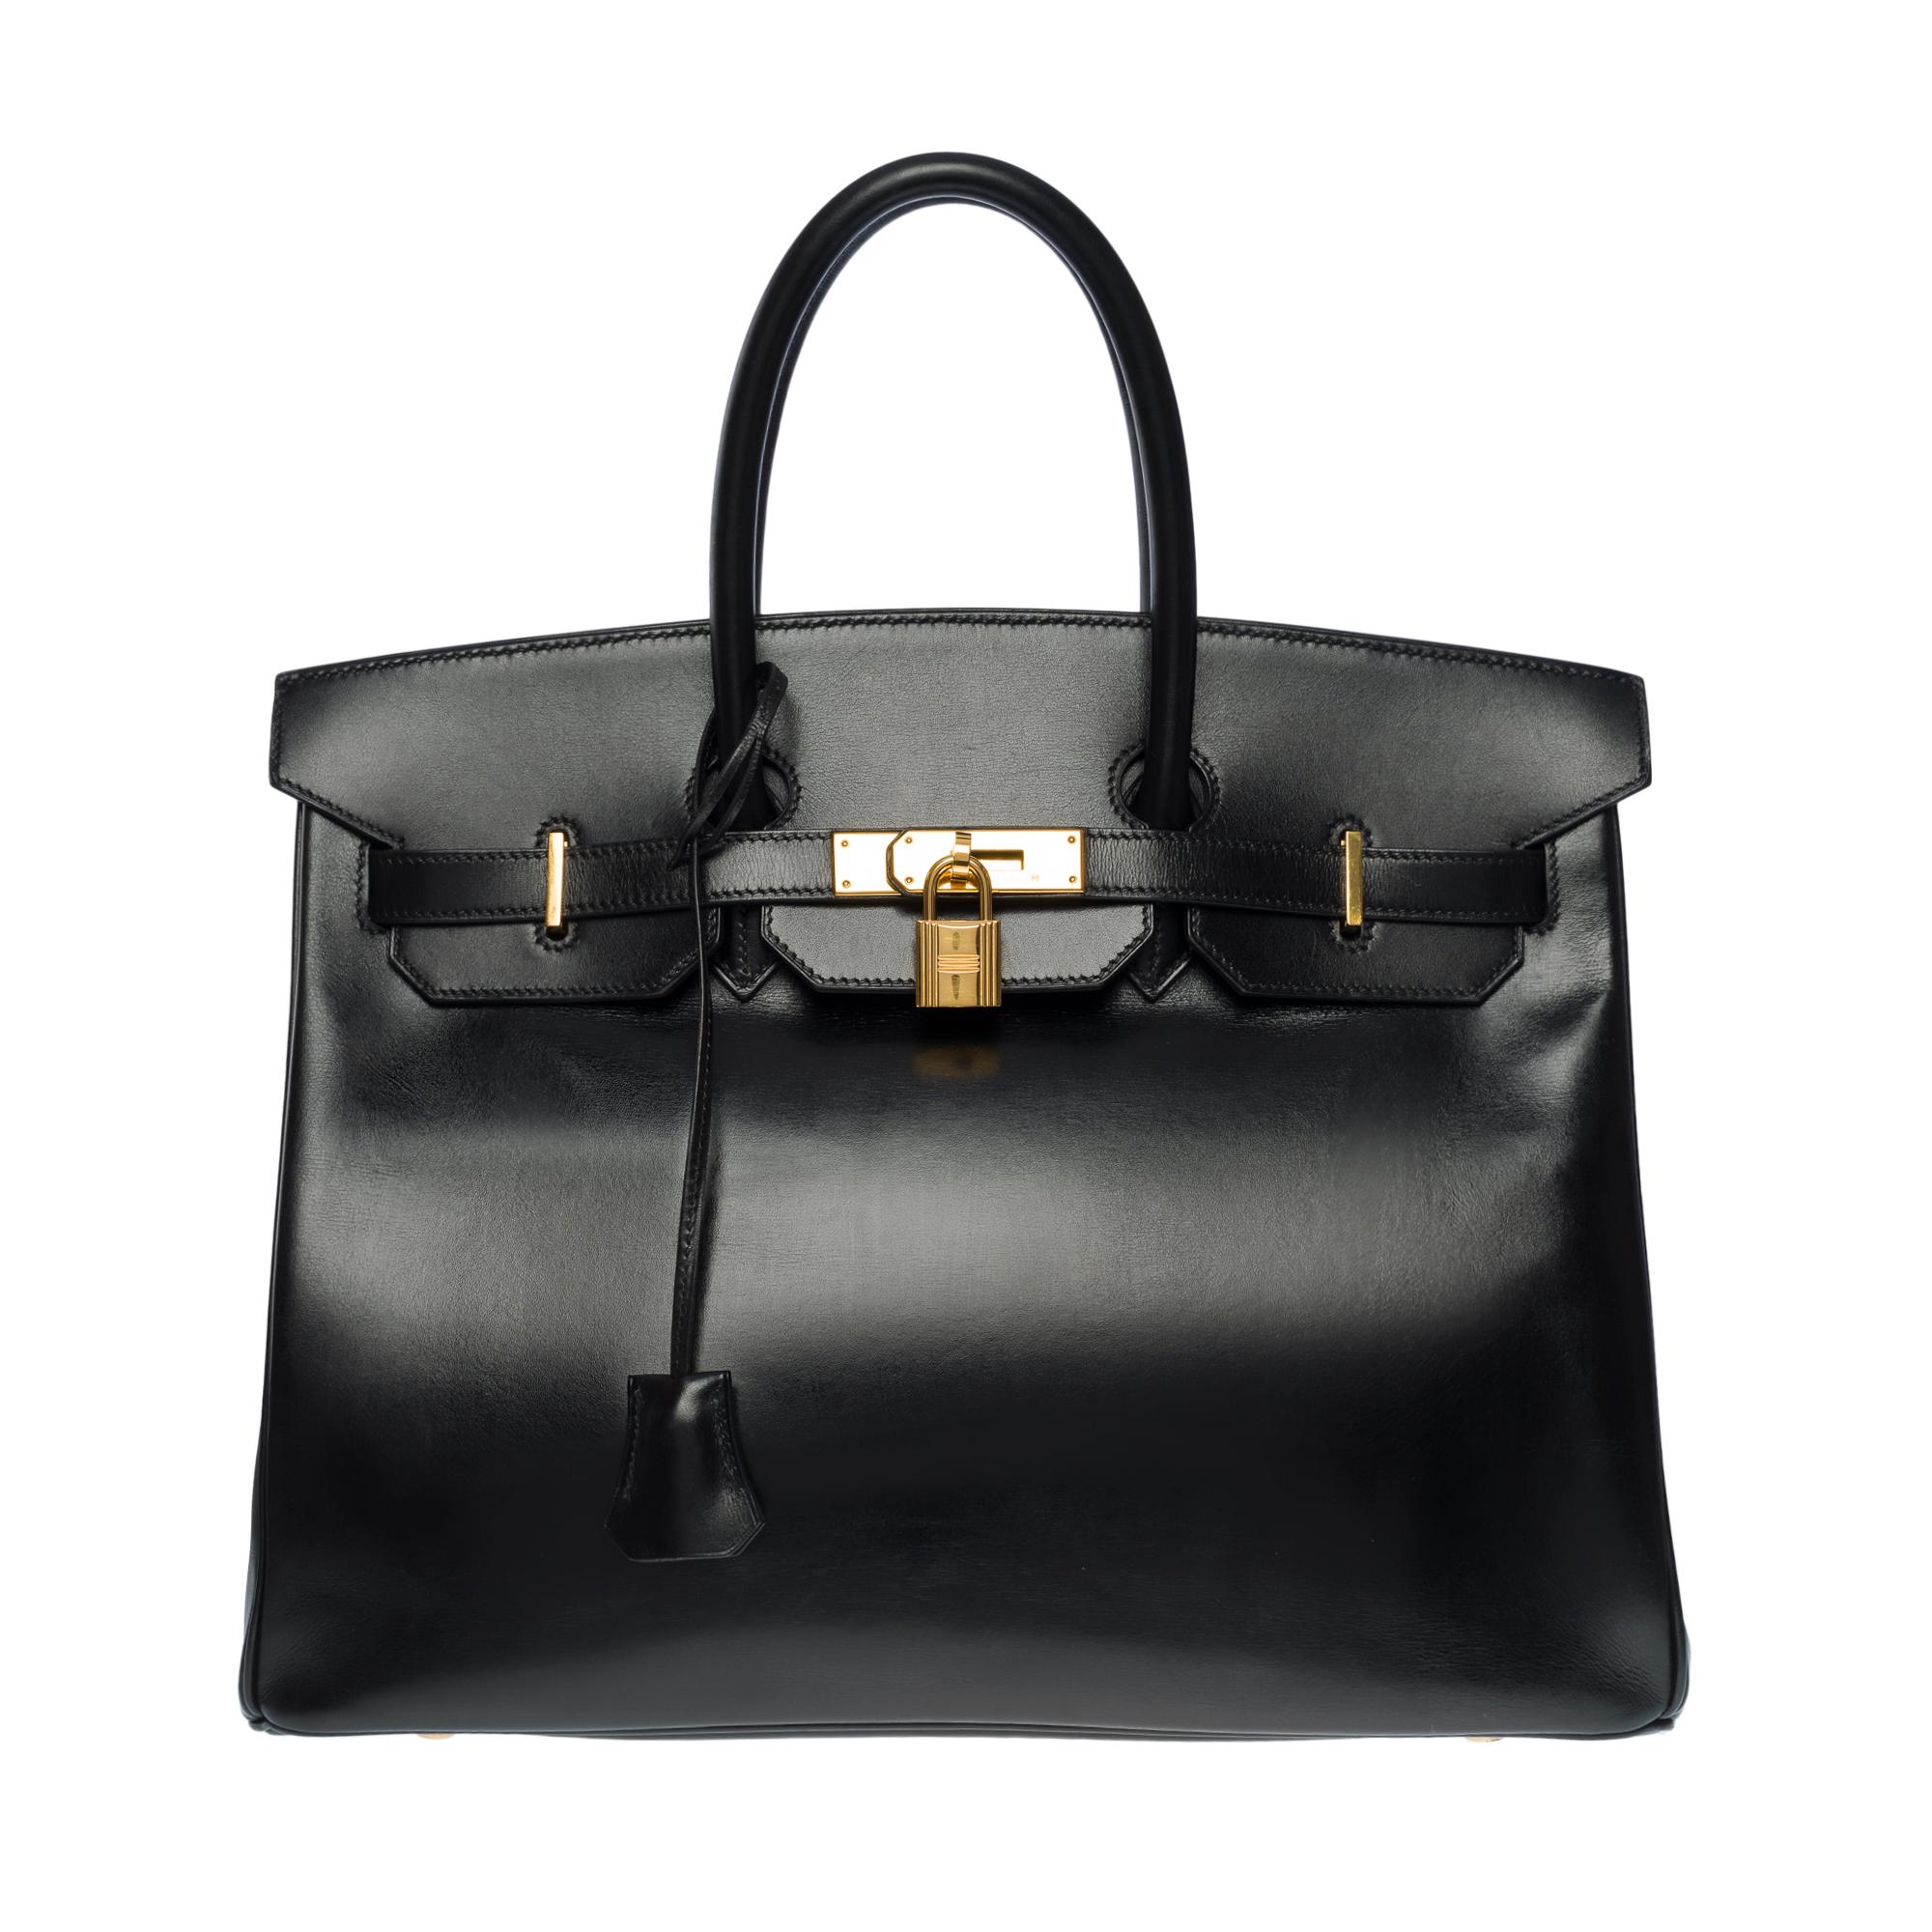 Fantastic Hermes Birkin 35 handbag in black box calf leather, gold plated metal hardware, double handle in black box leather for a hand-held

Flap closure
Black leather lining, one zippered pocket, one patch pocket
Signature: 